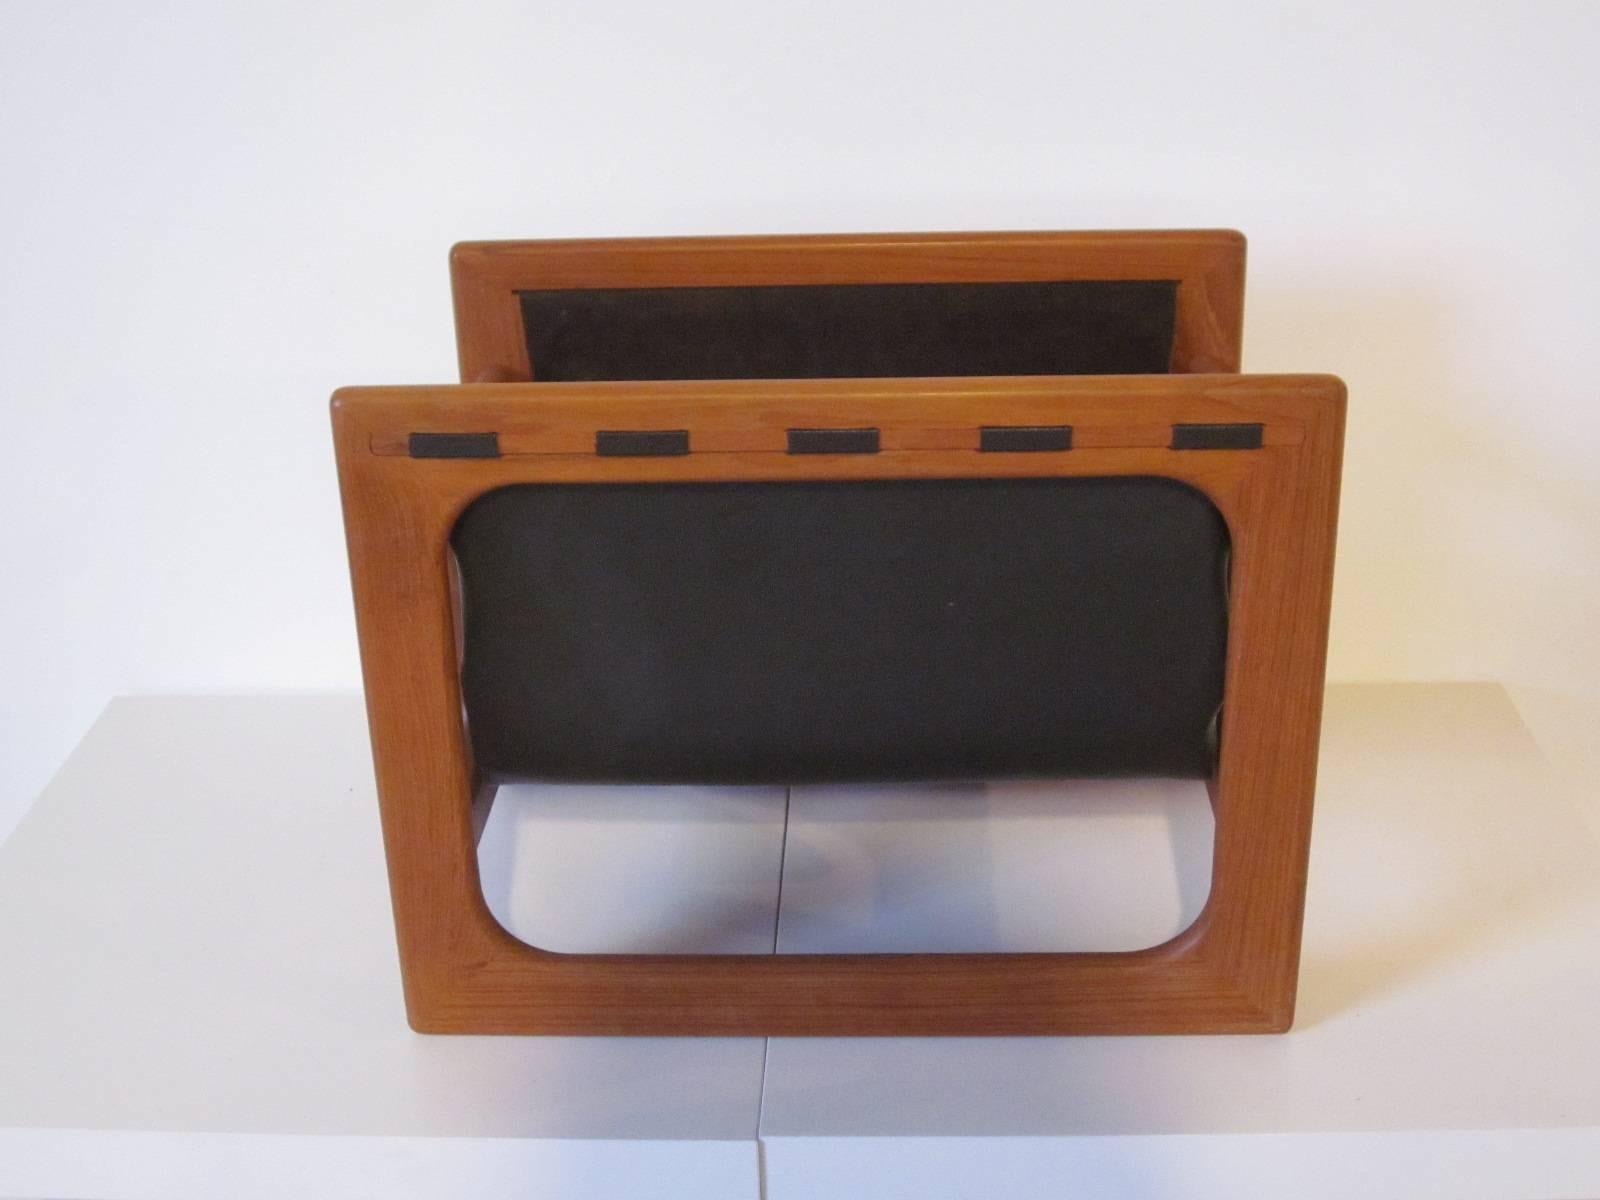 A well constructed sculptural teakwood magazine rack with suede sling holder, made in Denmark.